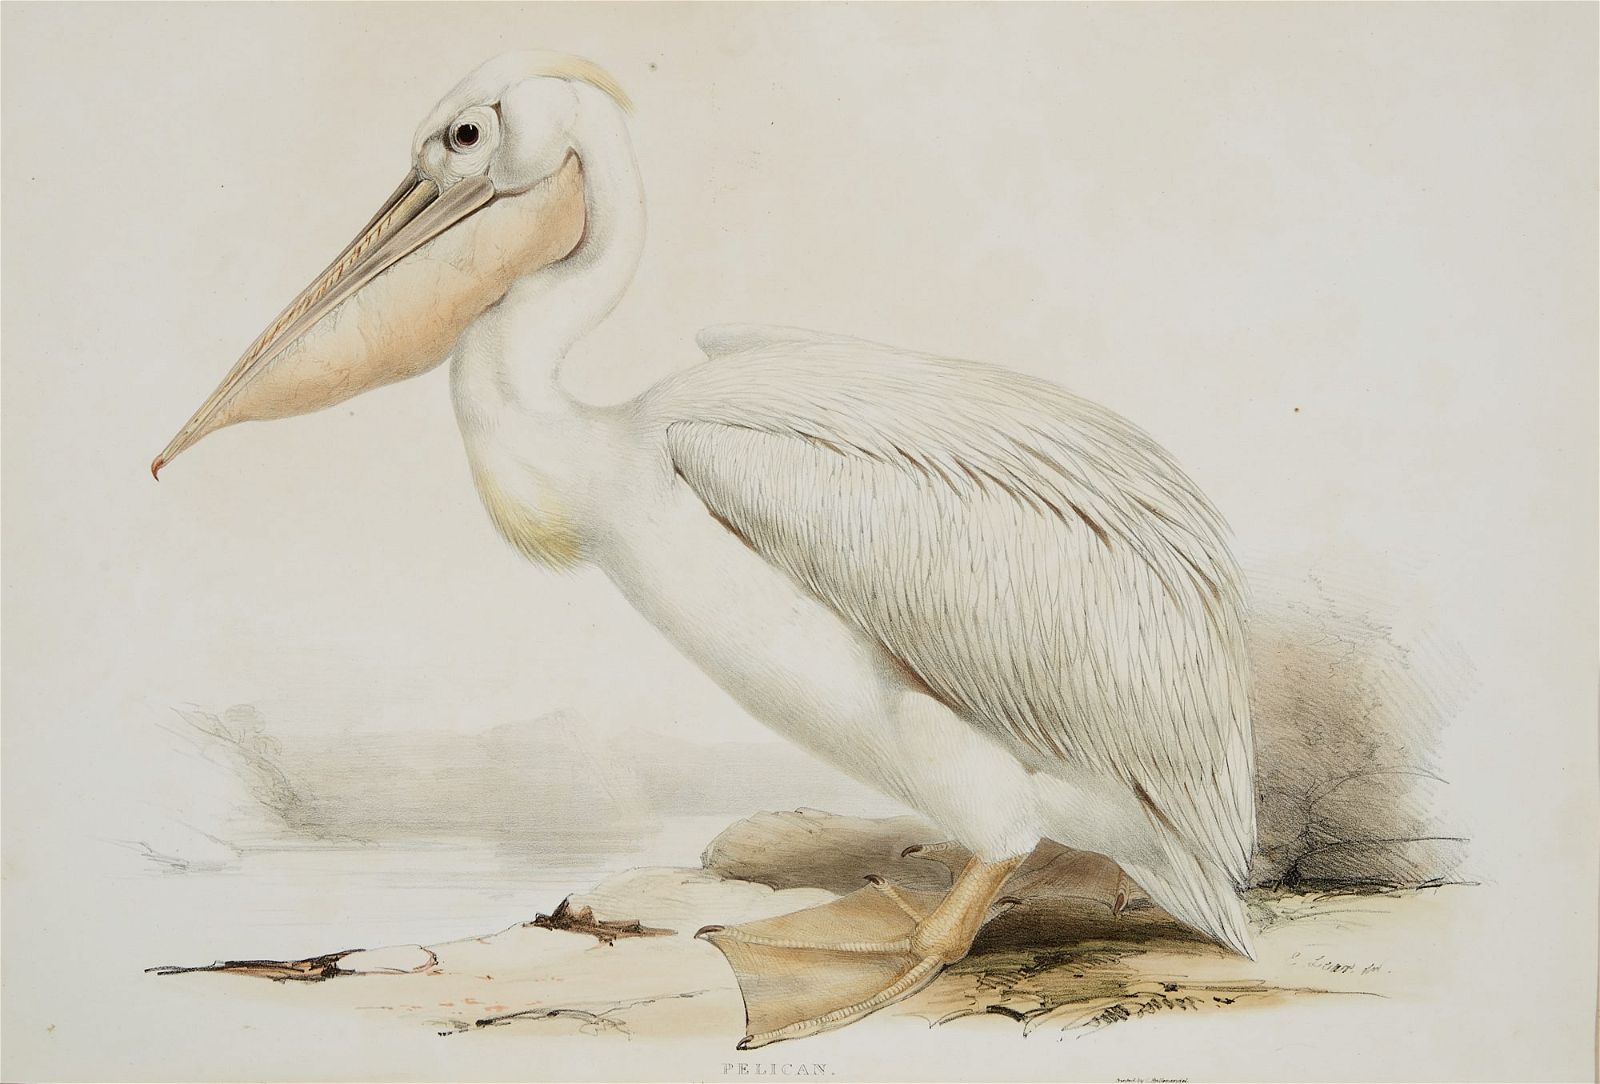 EDWARD LEAR PELICAN FROM THE 2fb3266